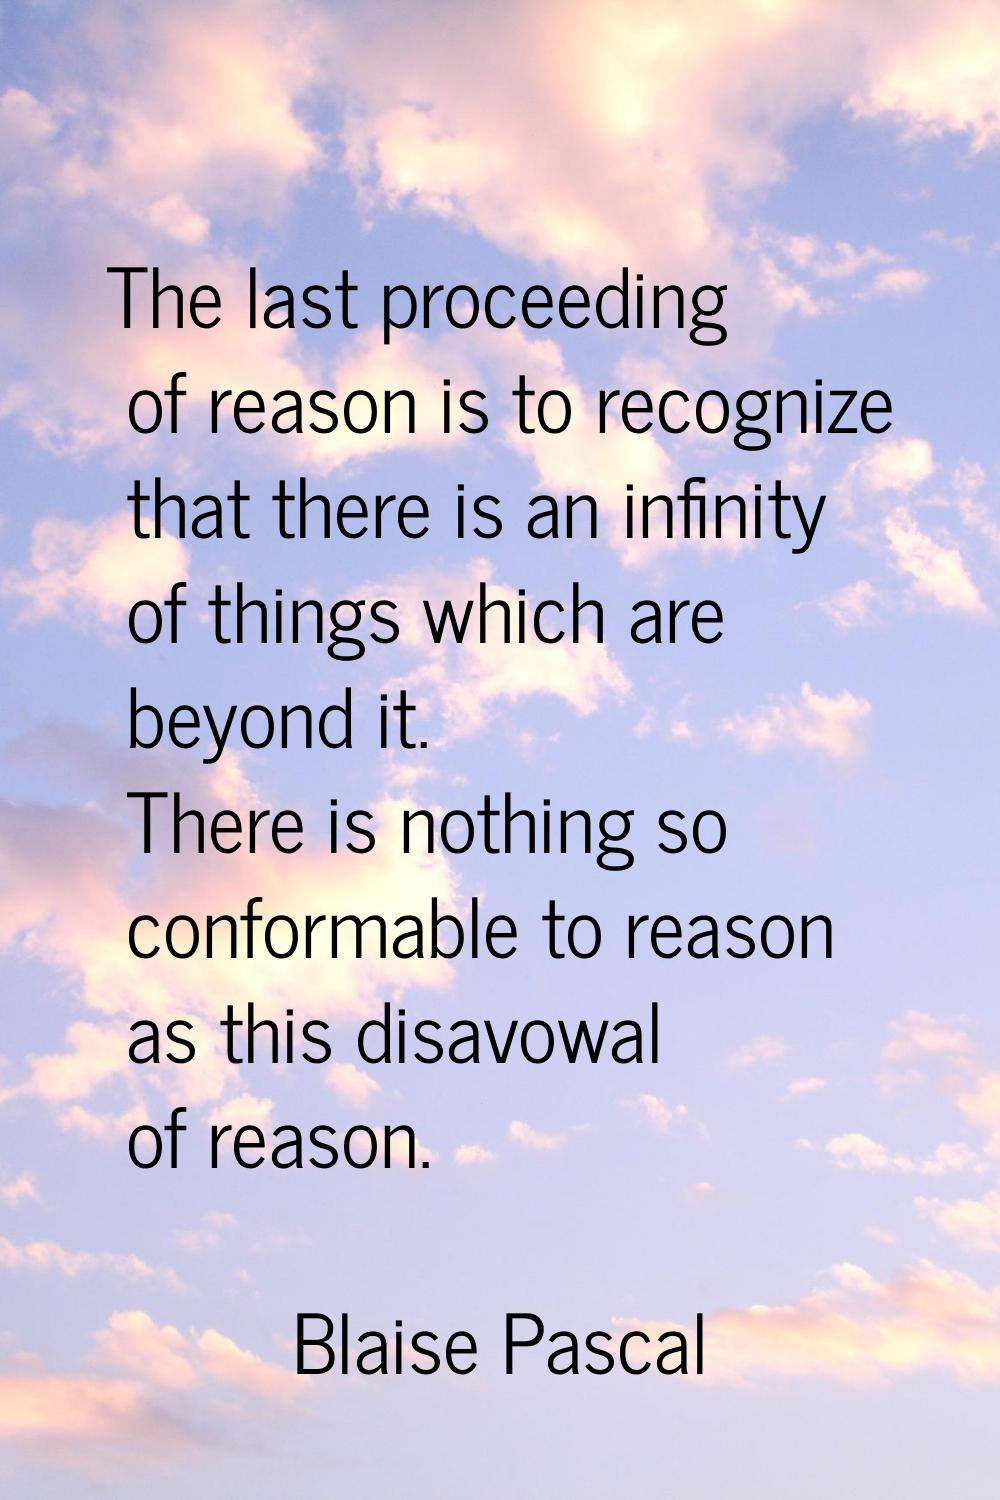 The last proceeding of reason is to recognize that there is an infinity of things which are beyond 